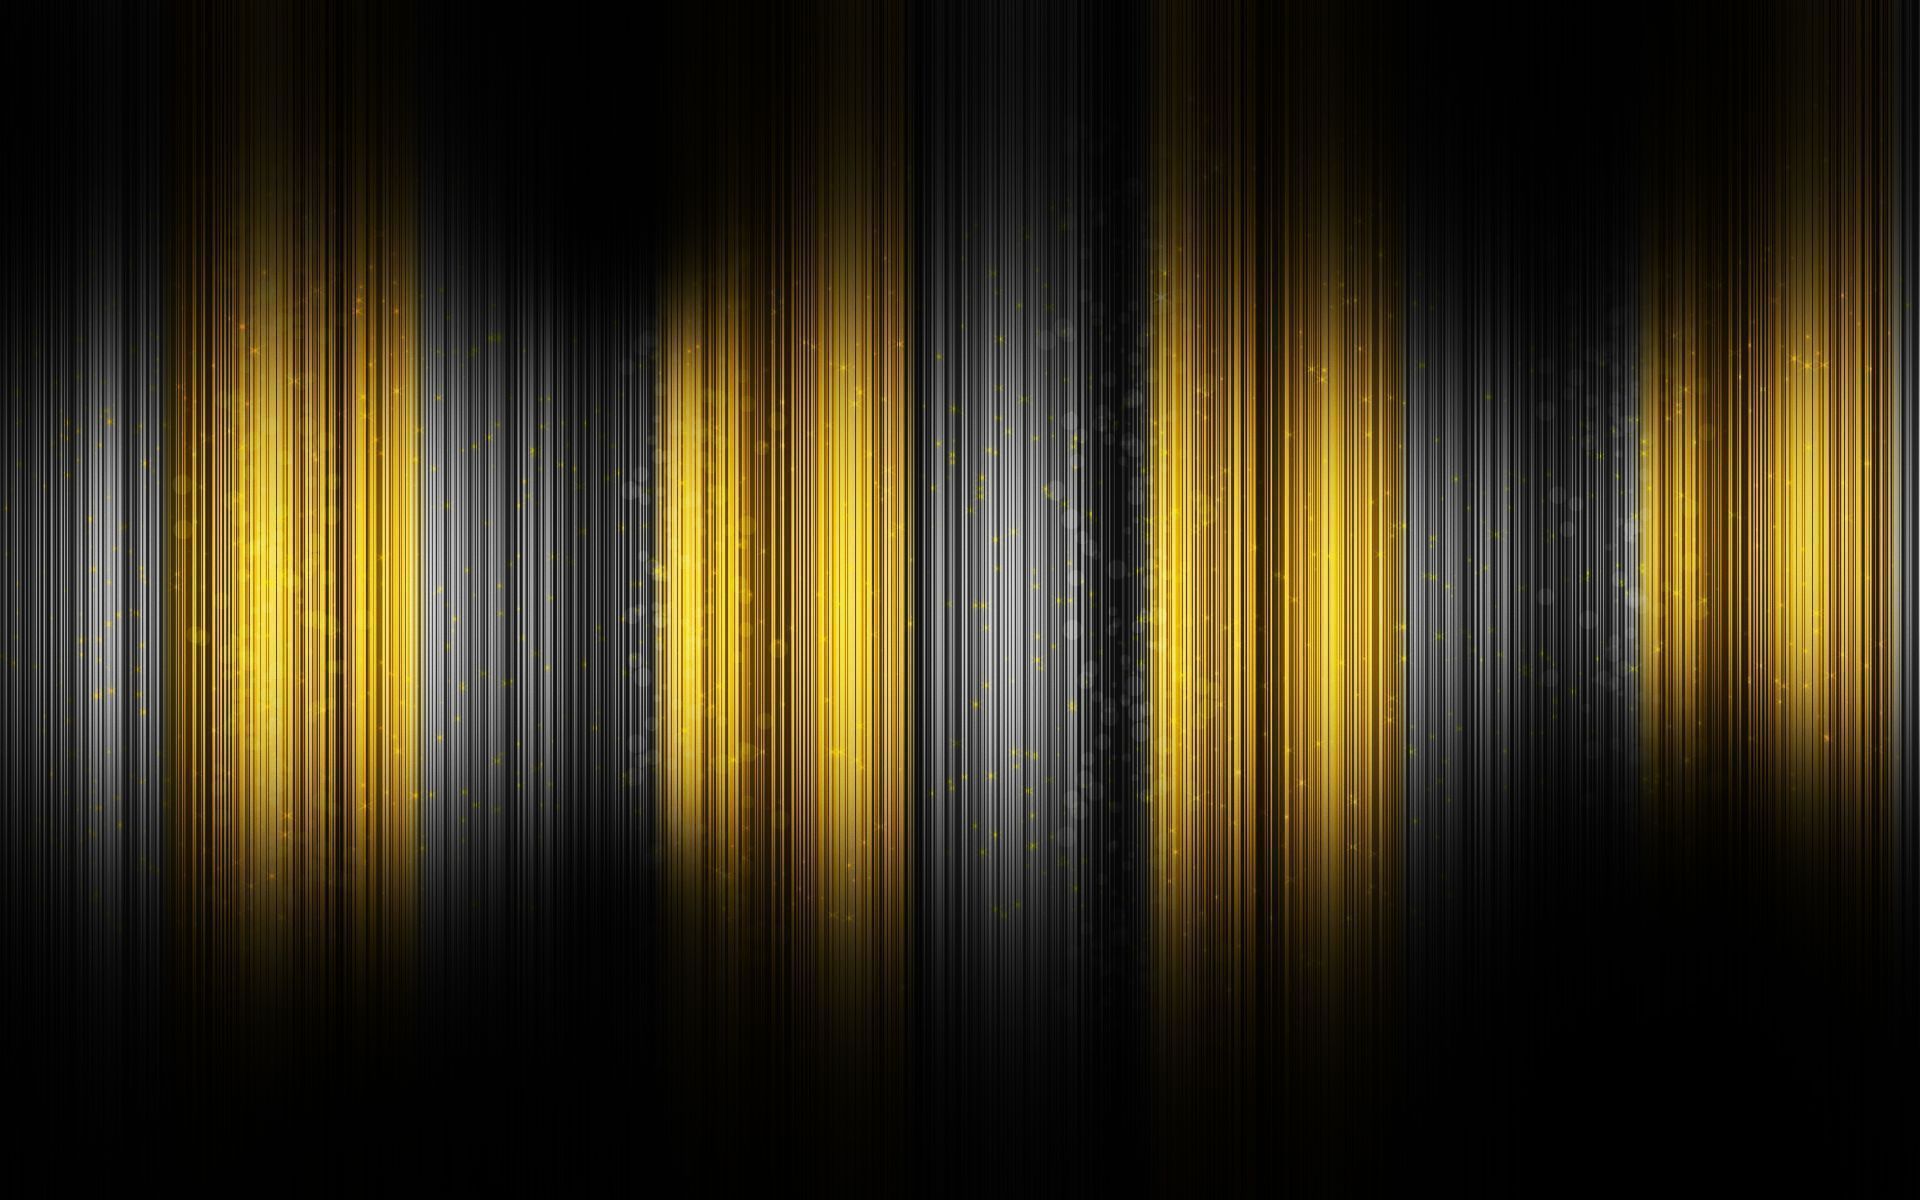 Abstract yellow and black latest hd wallpaper